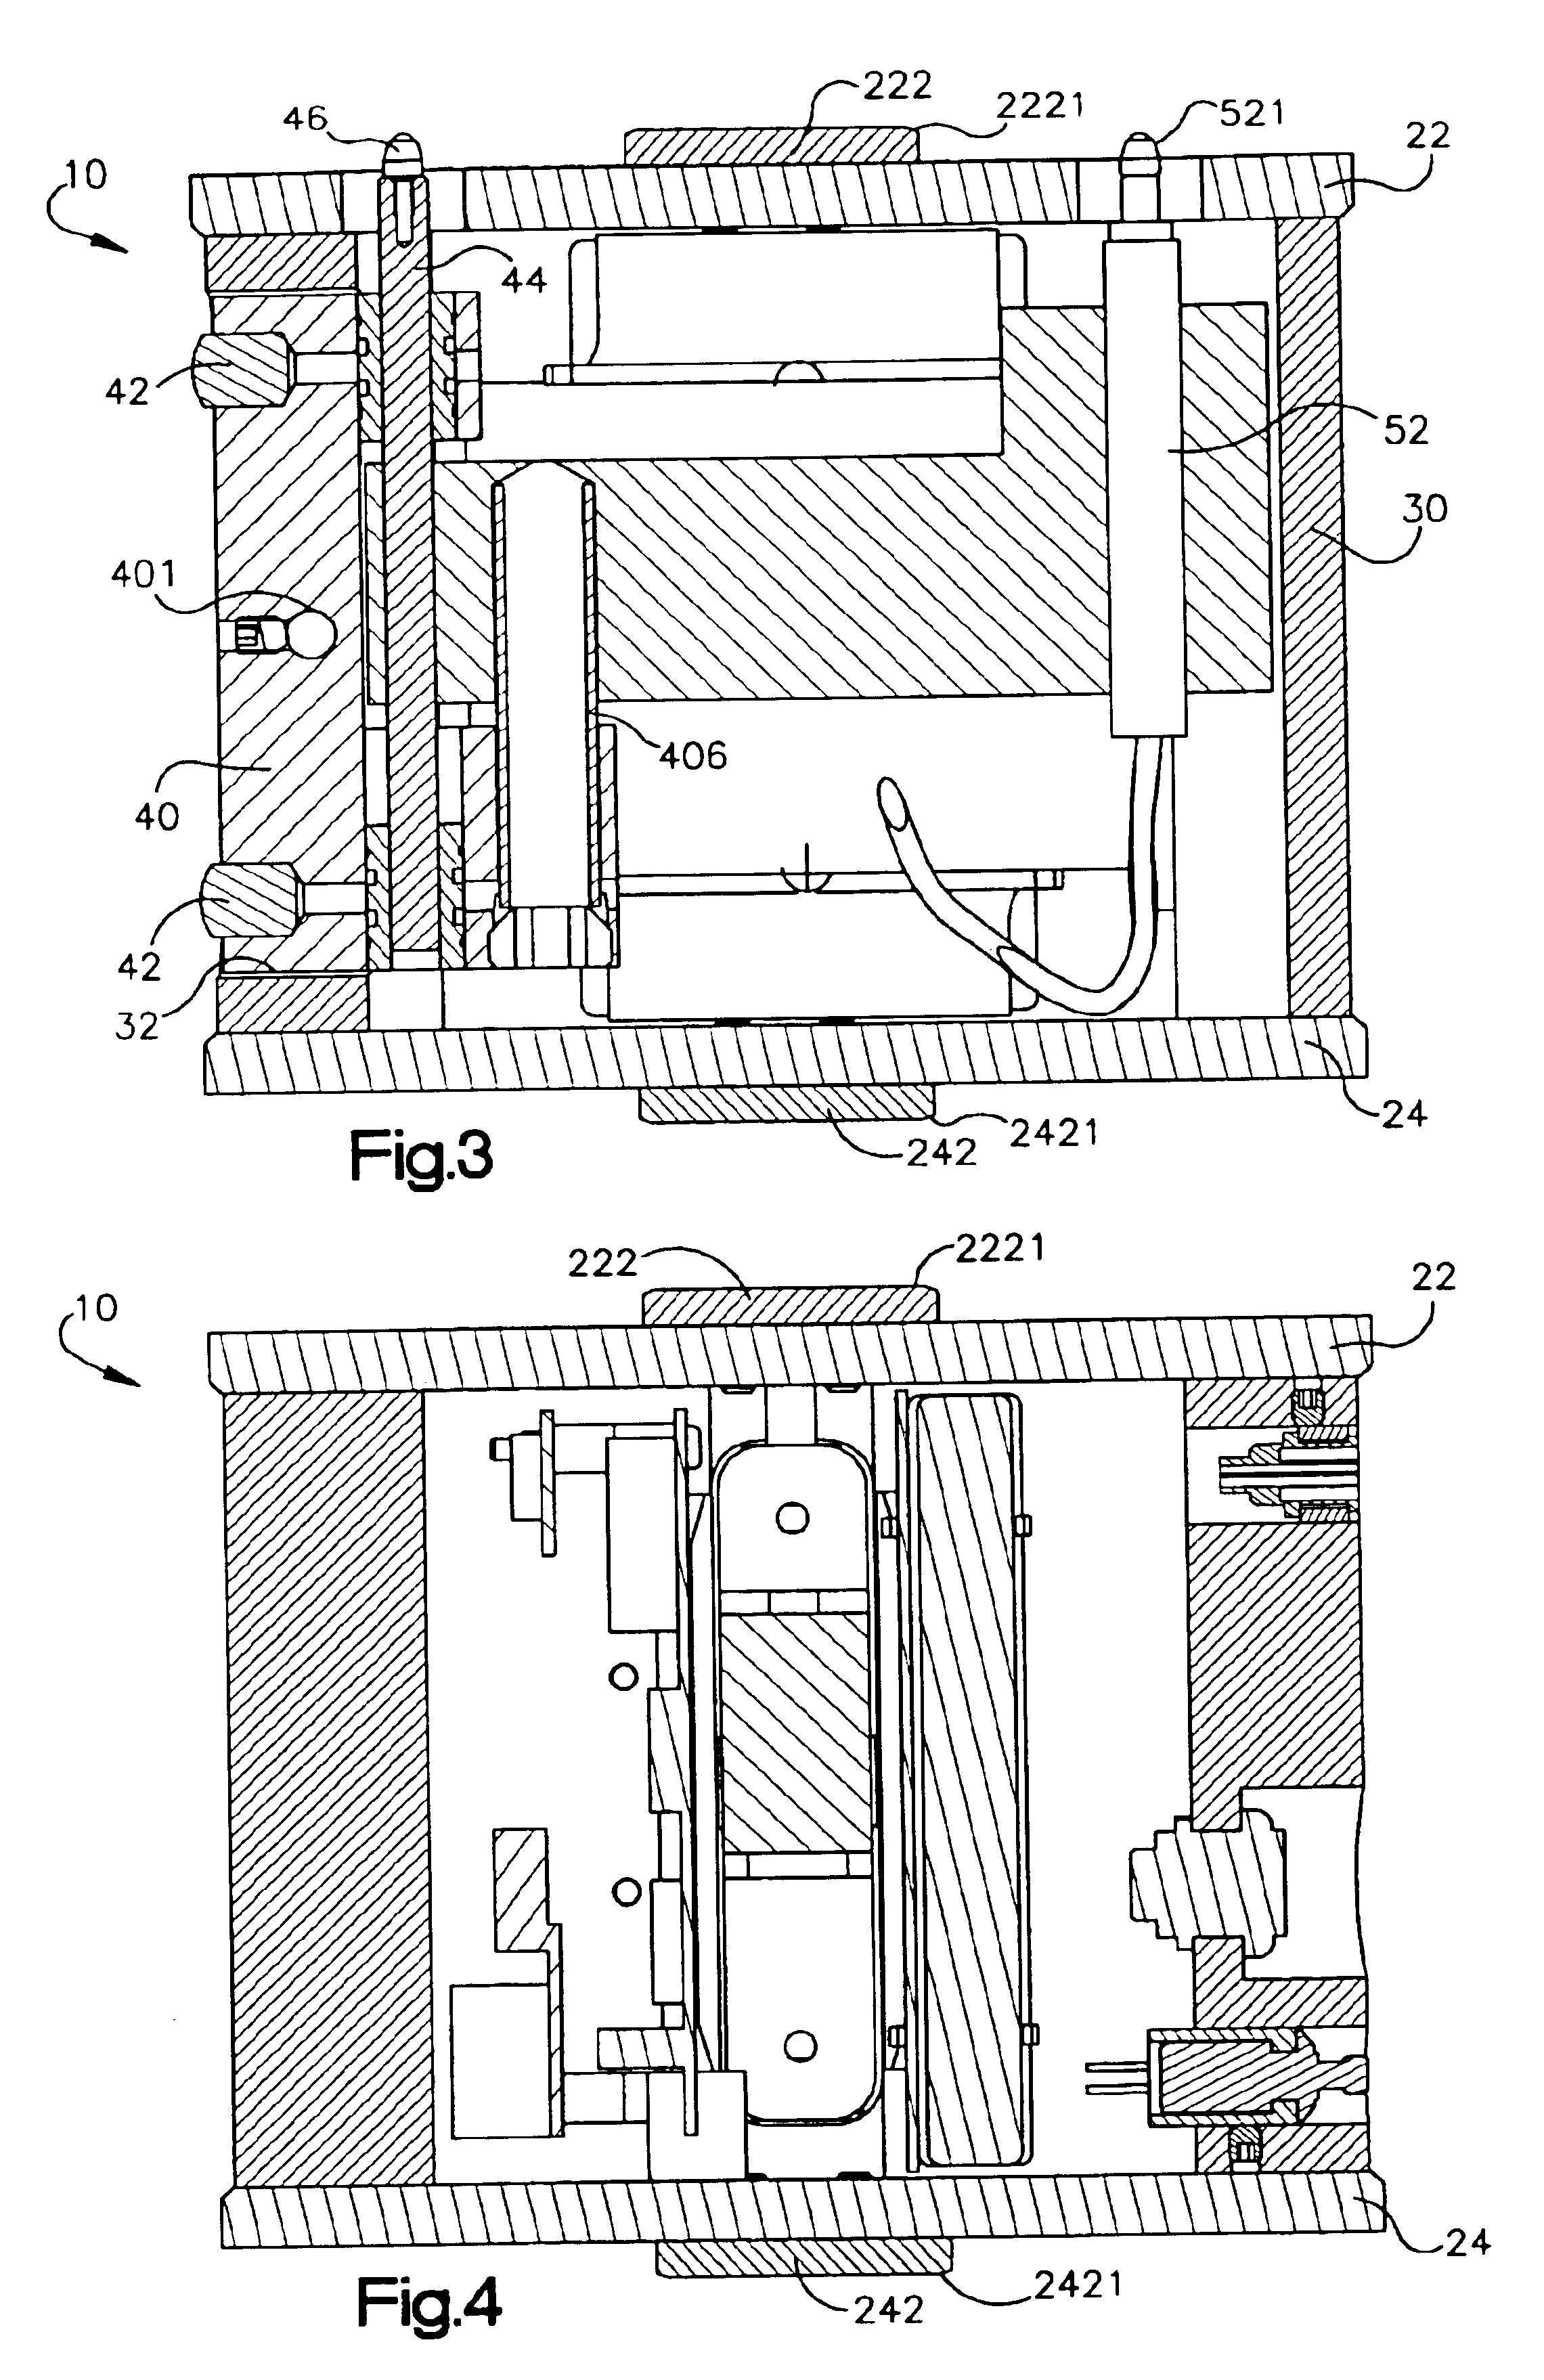 Devices and methods for applying known resistance loads and measuring internal angles of gyration in gyratory compactors